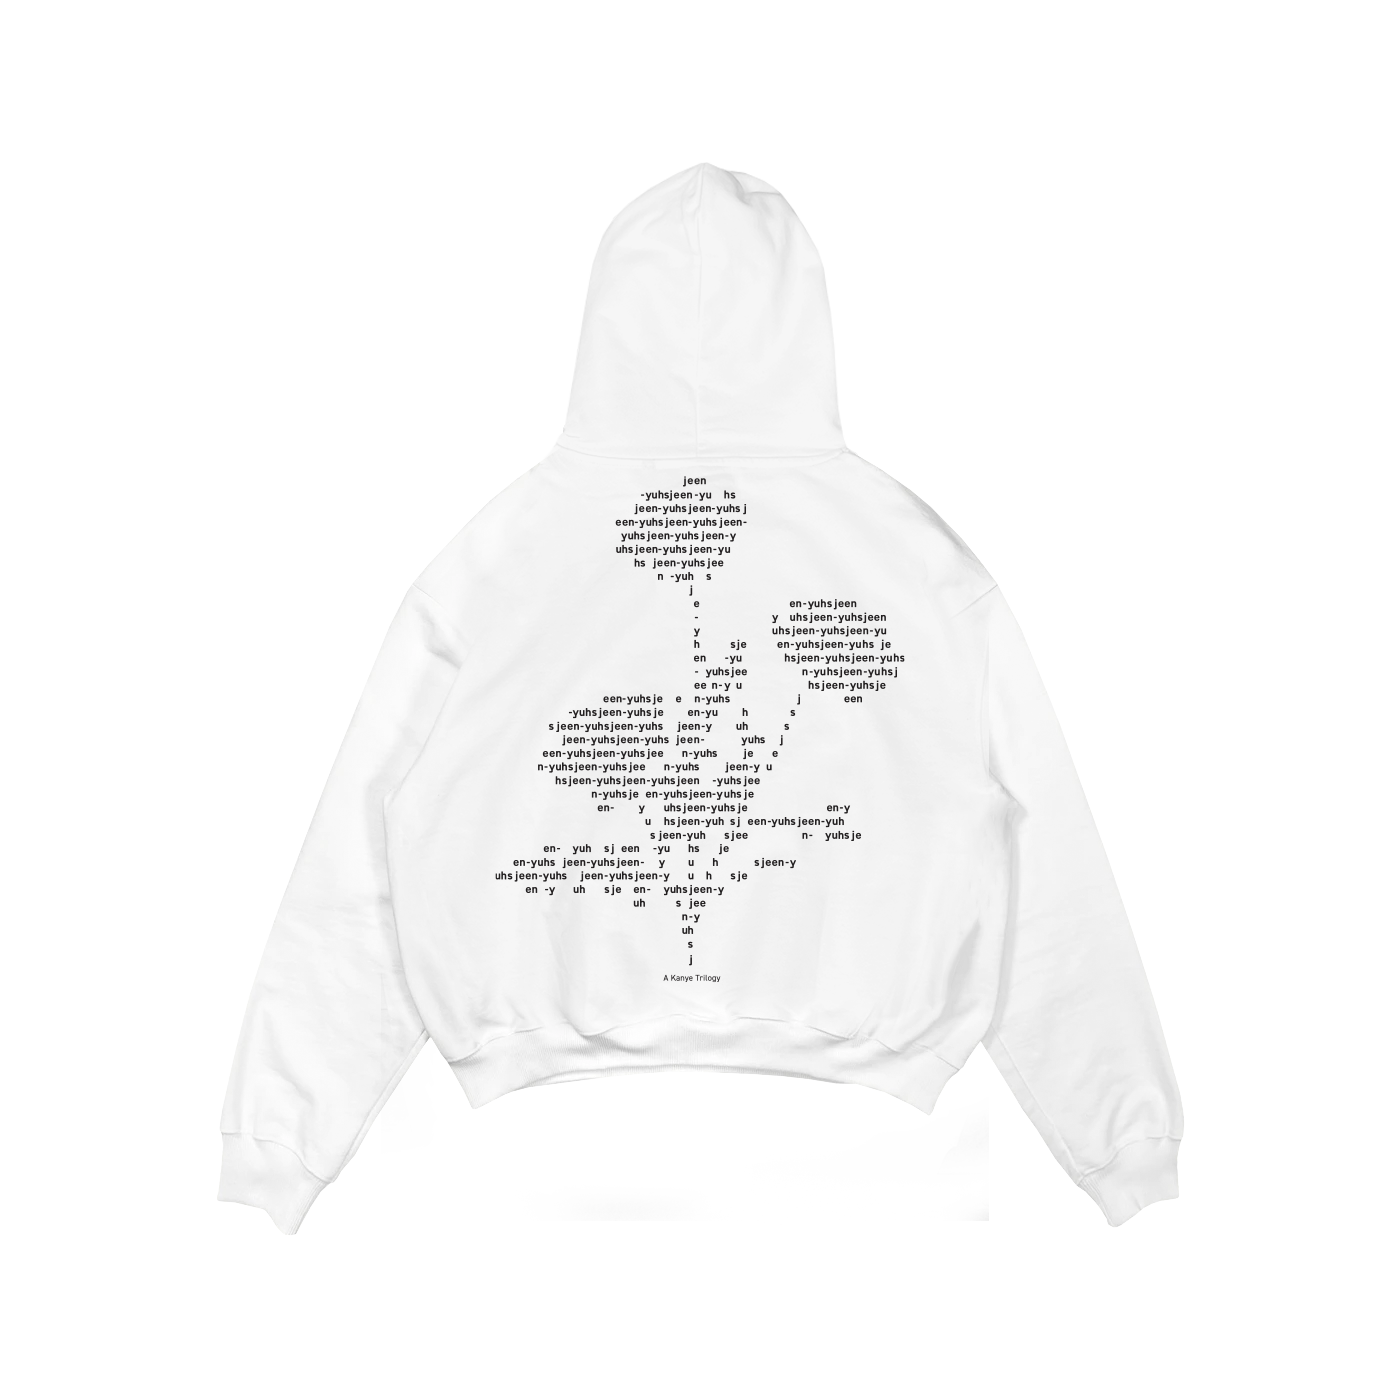 Jeen-Yuhs White Flwr Hoodie